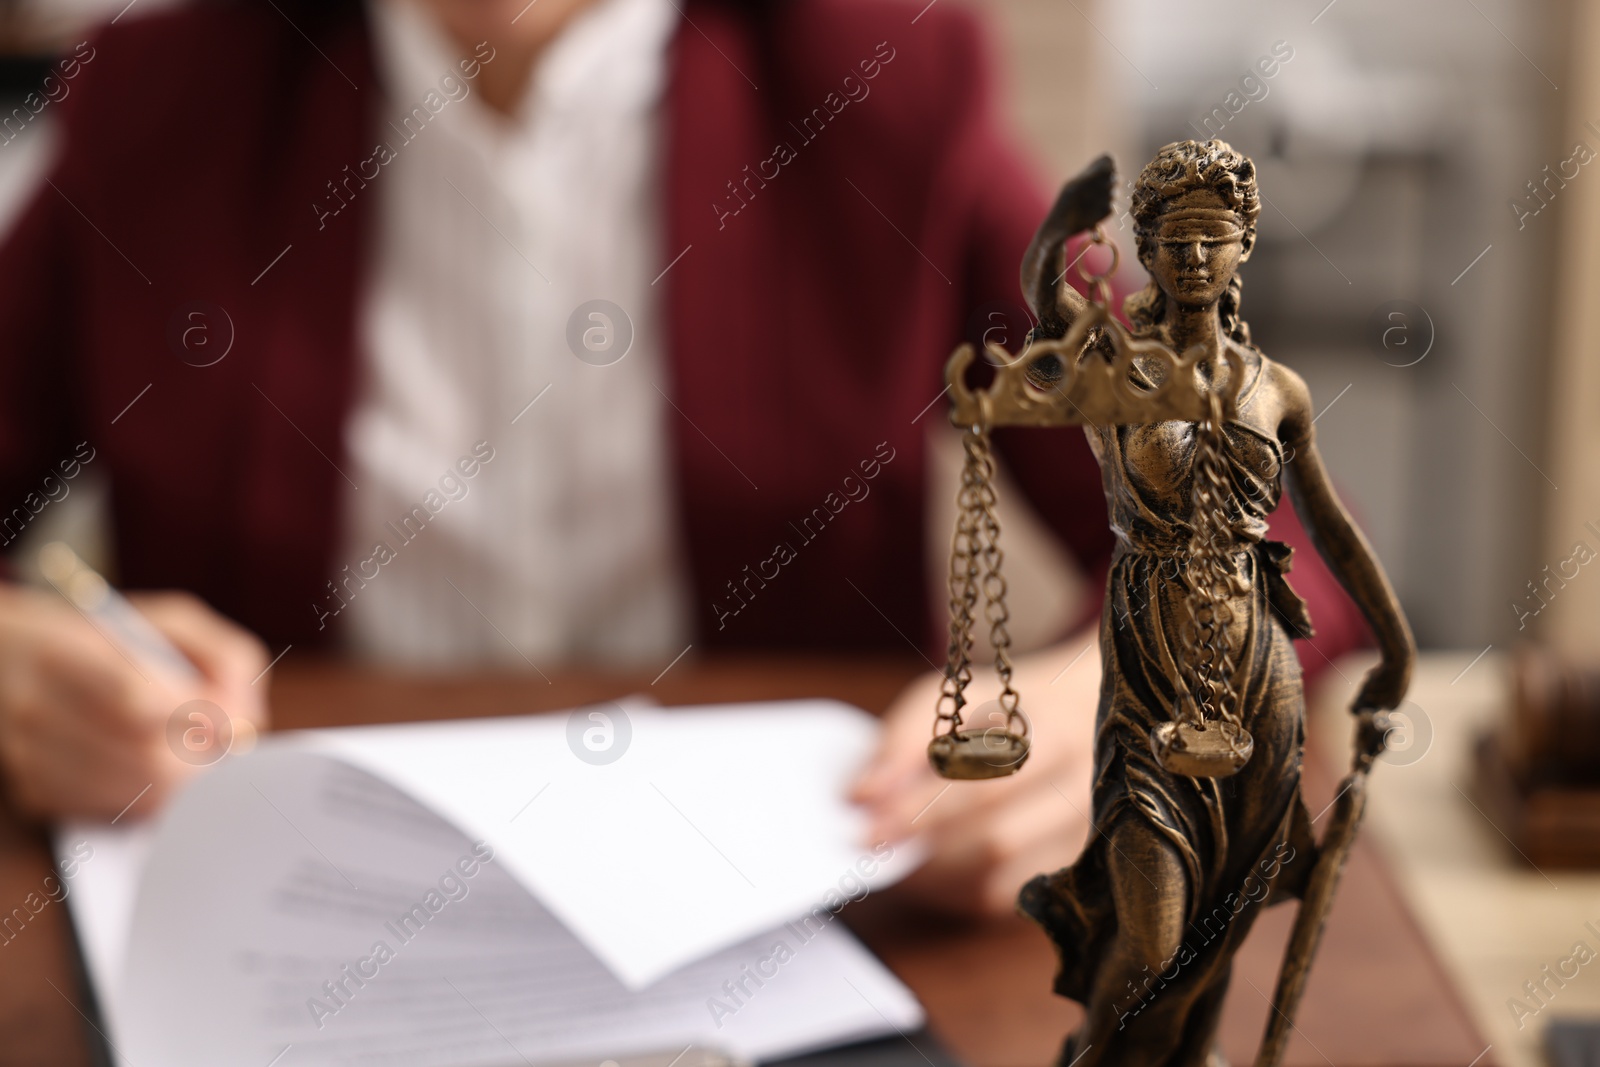 Photo of Notary signing document at table in office, focus on statue of Lady Justice